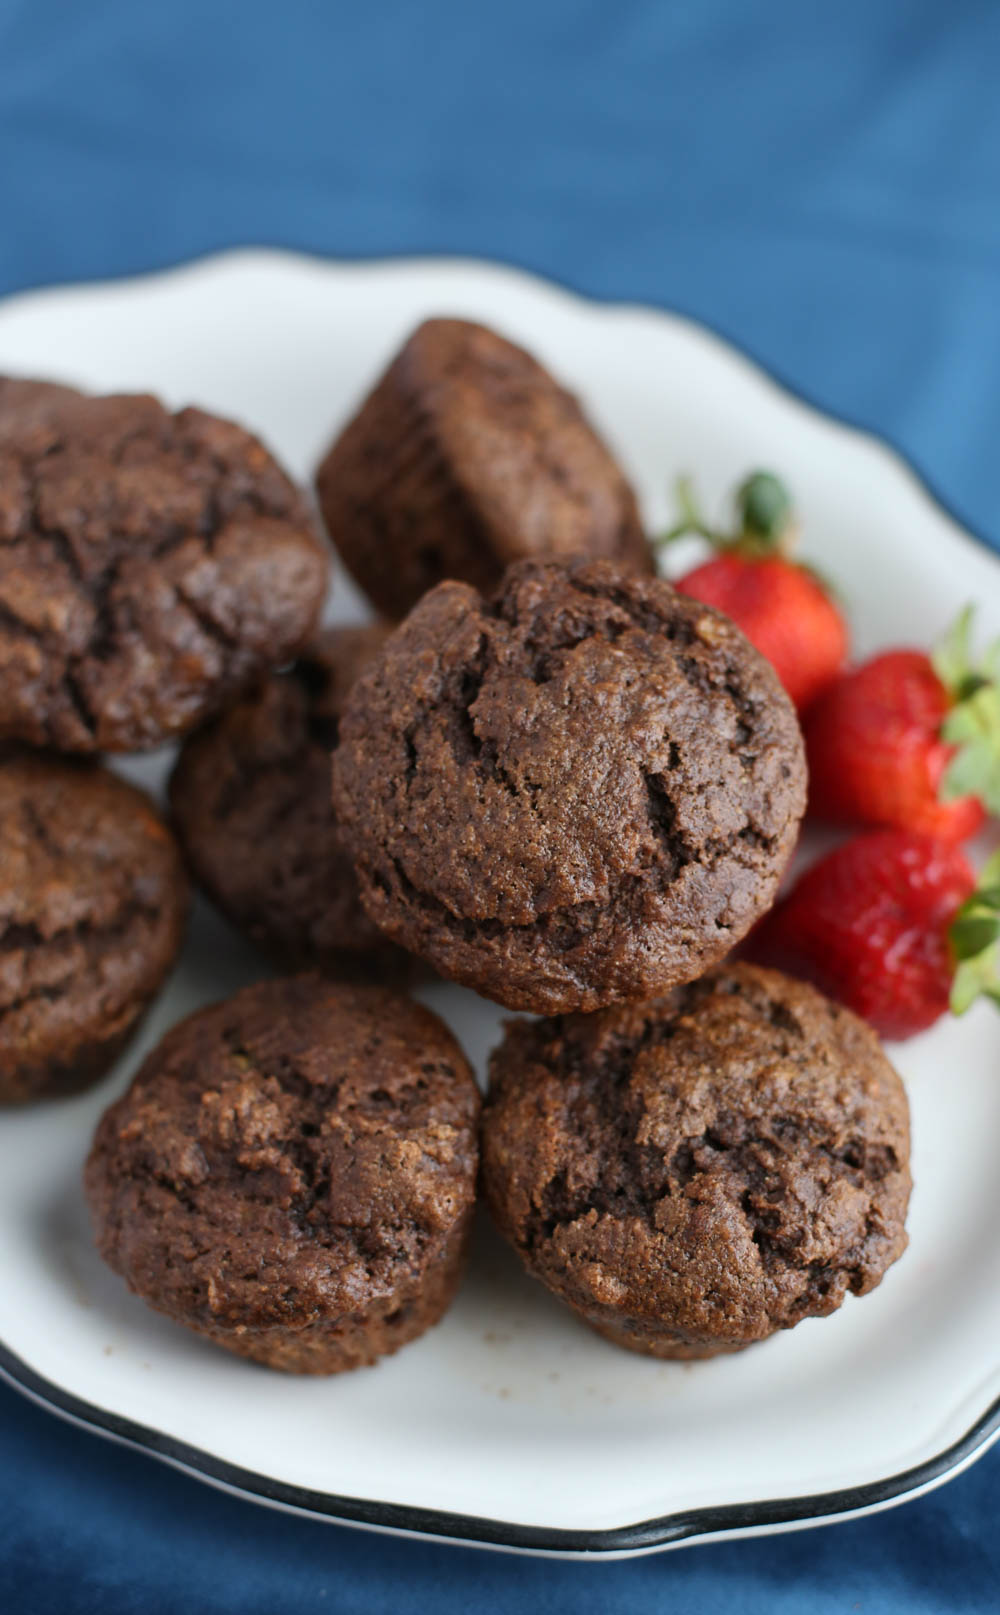 Chocolate banana muffins stacked on a white plate with a few whole strawberries on one side.